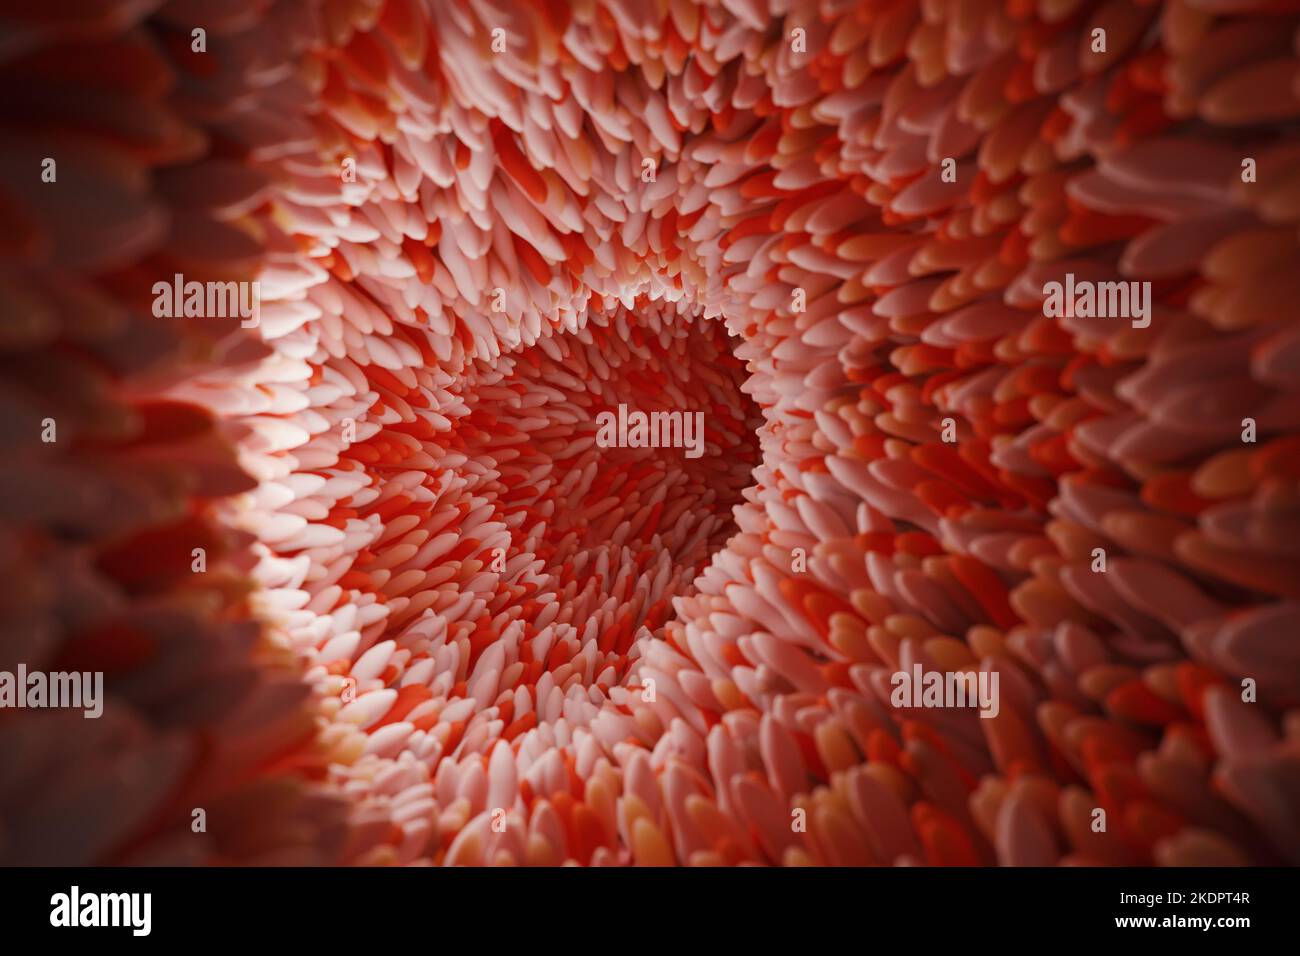 Microvilli on surface of digestive system or intestinal tract. 3D rendering. Stock Photo